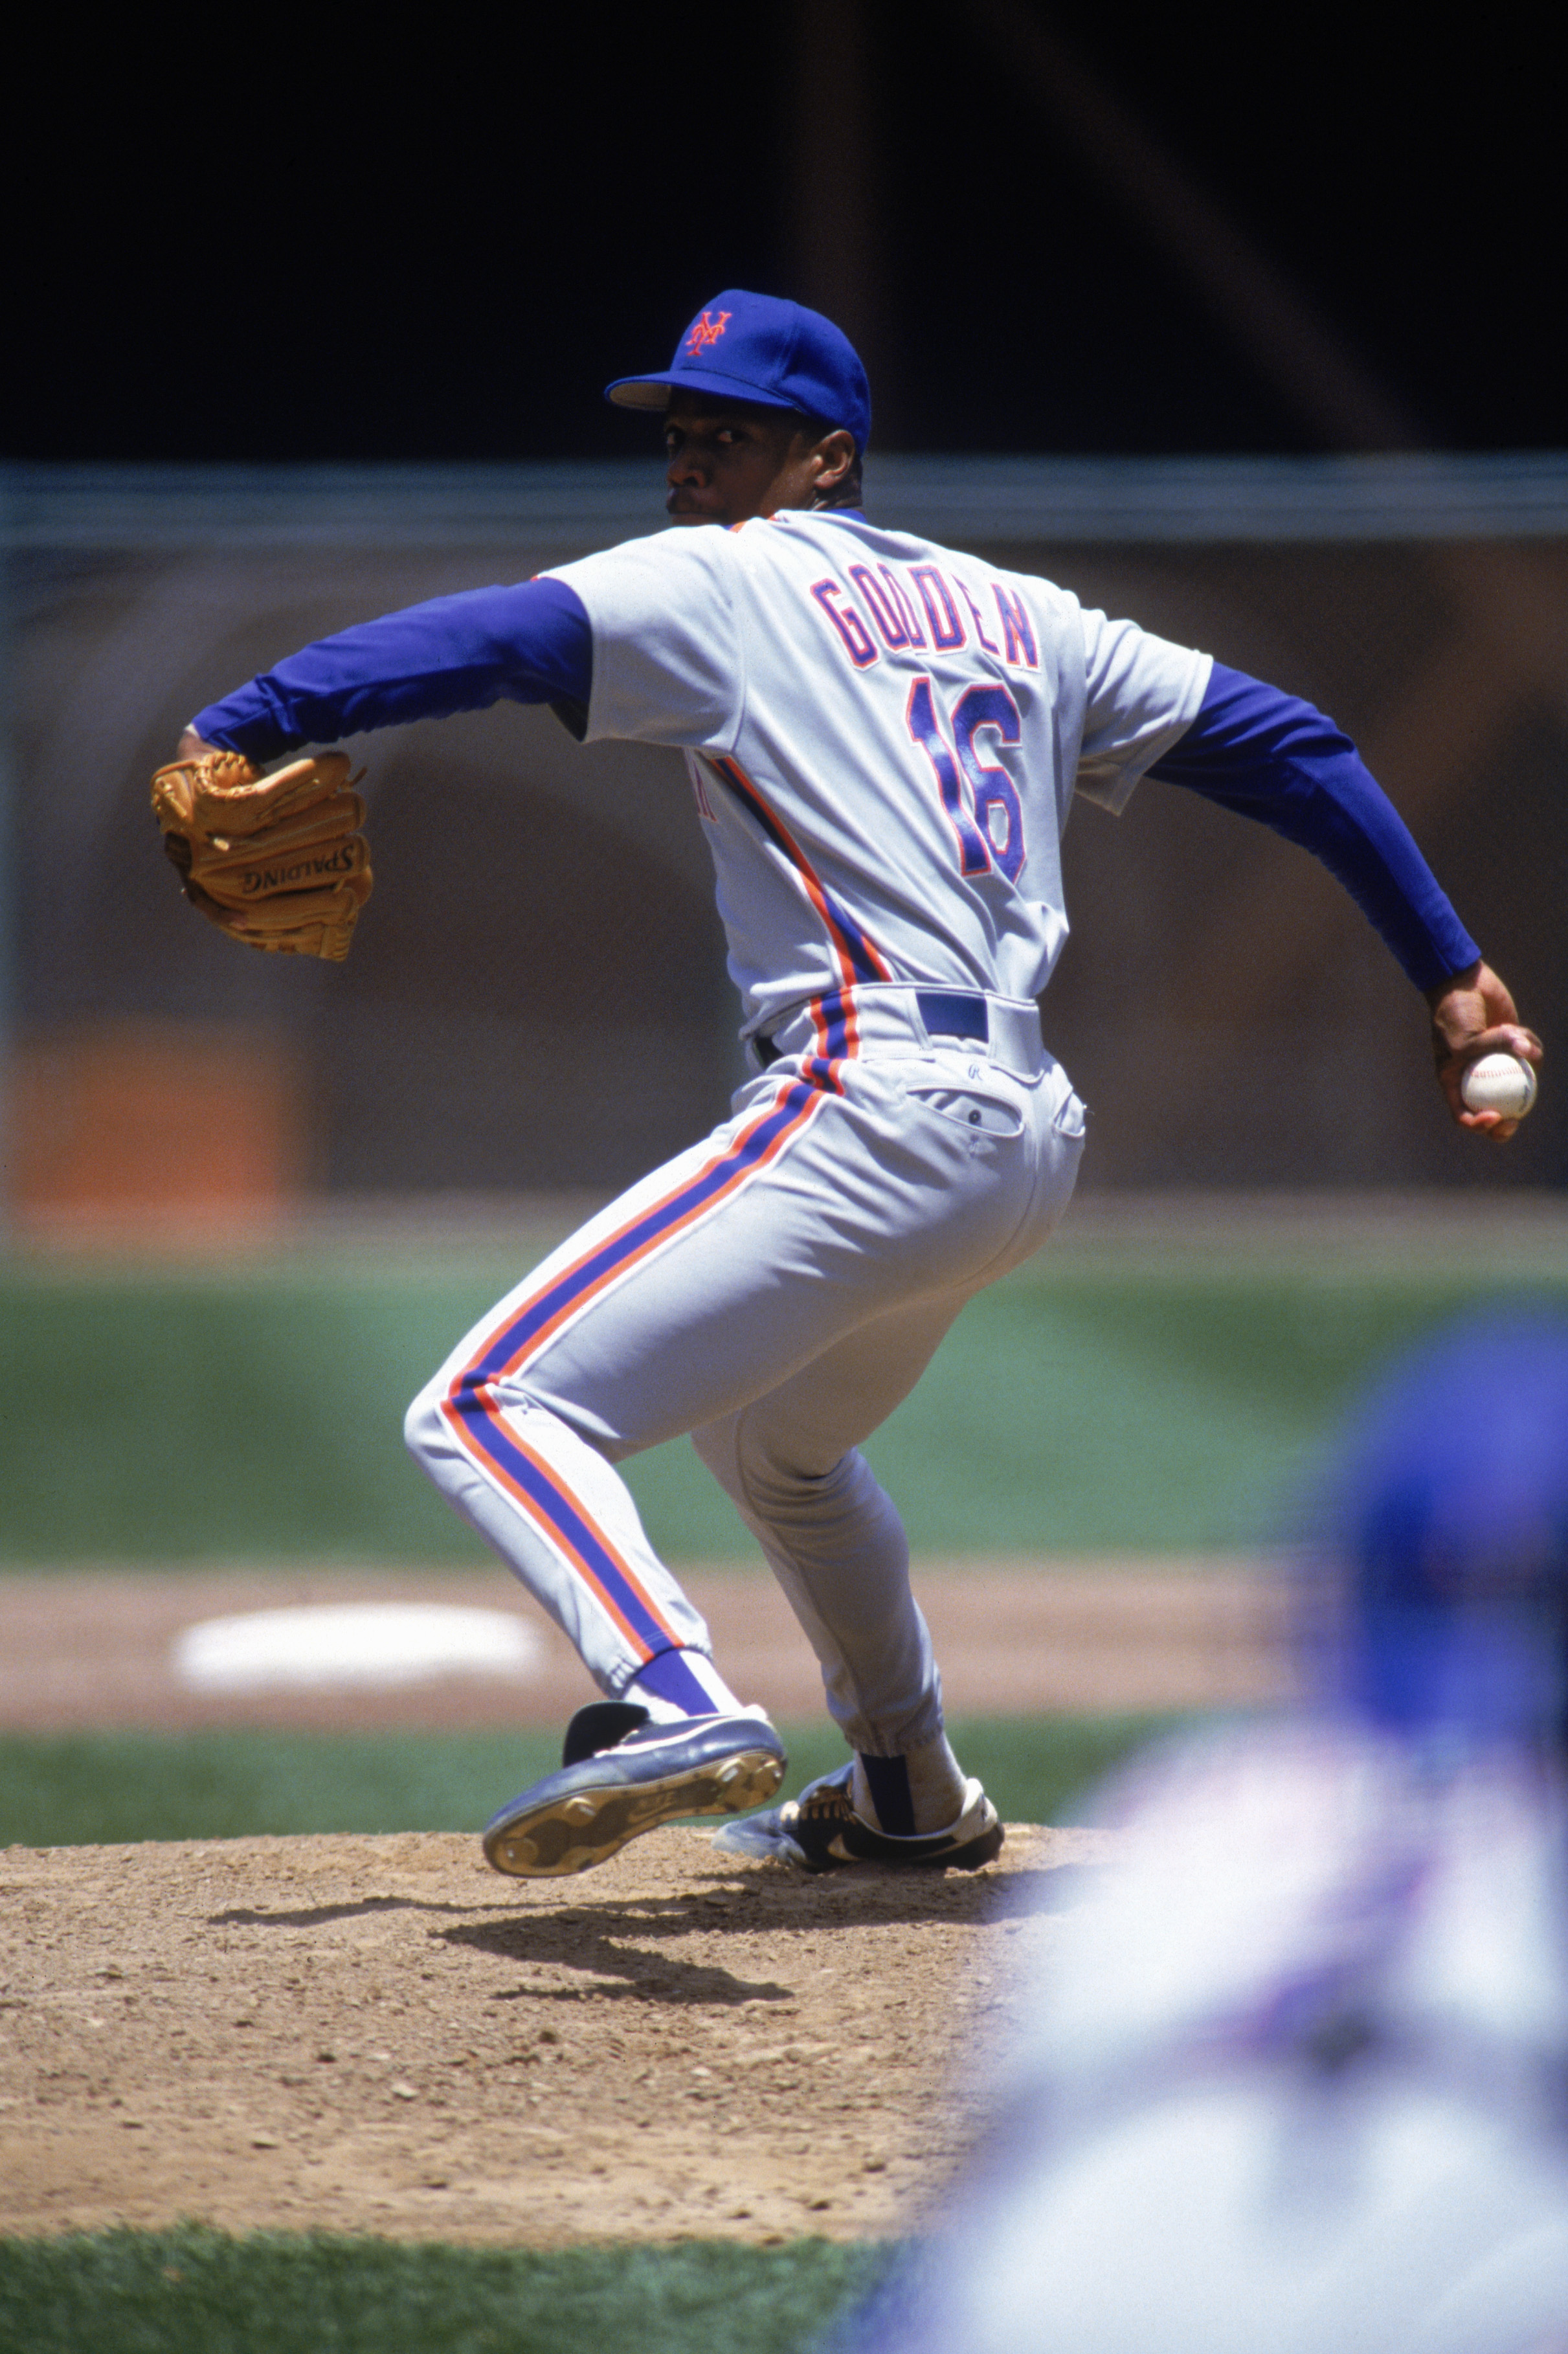 Who do you think was the better overall pitcher, Dwight Gooden or David  Cone? - Quora